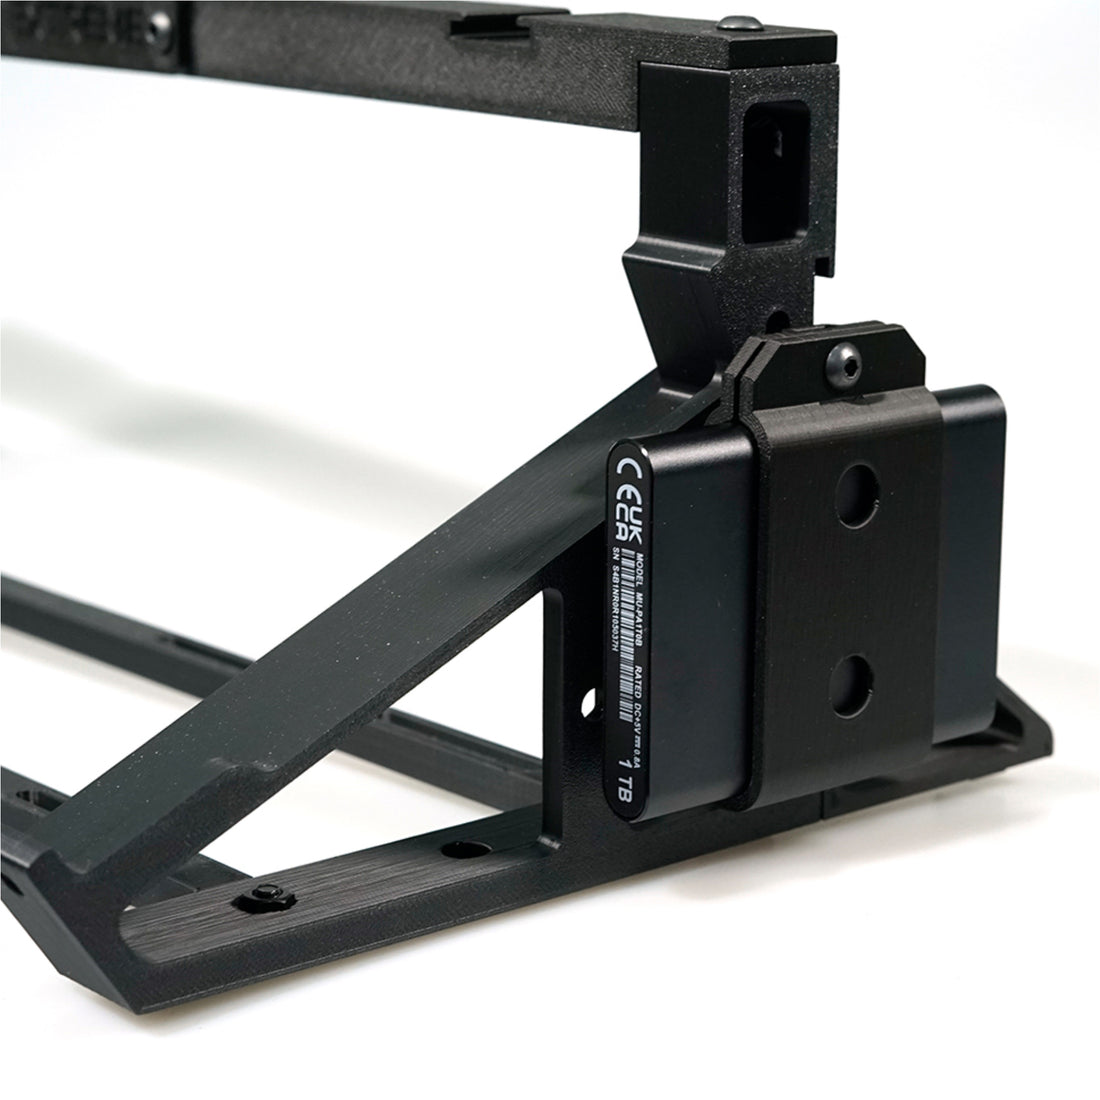 SSD Holder for PK1 Stands (Compatible with Samsung T5 / T7